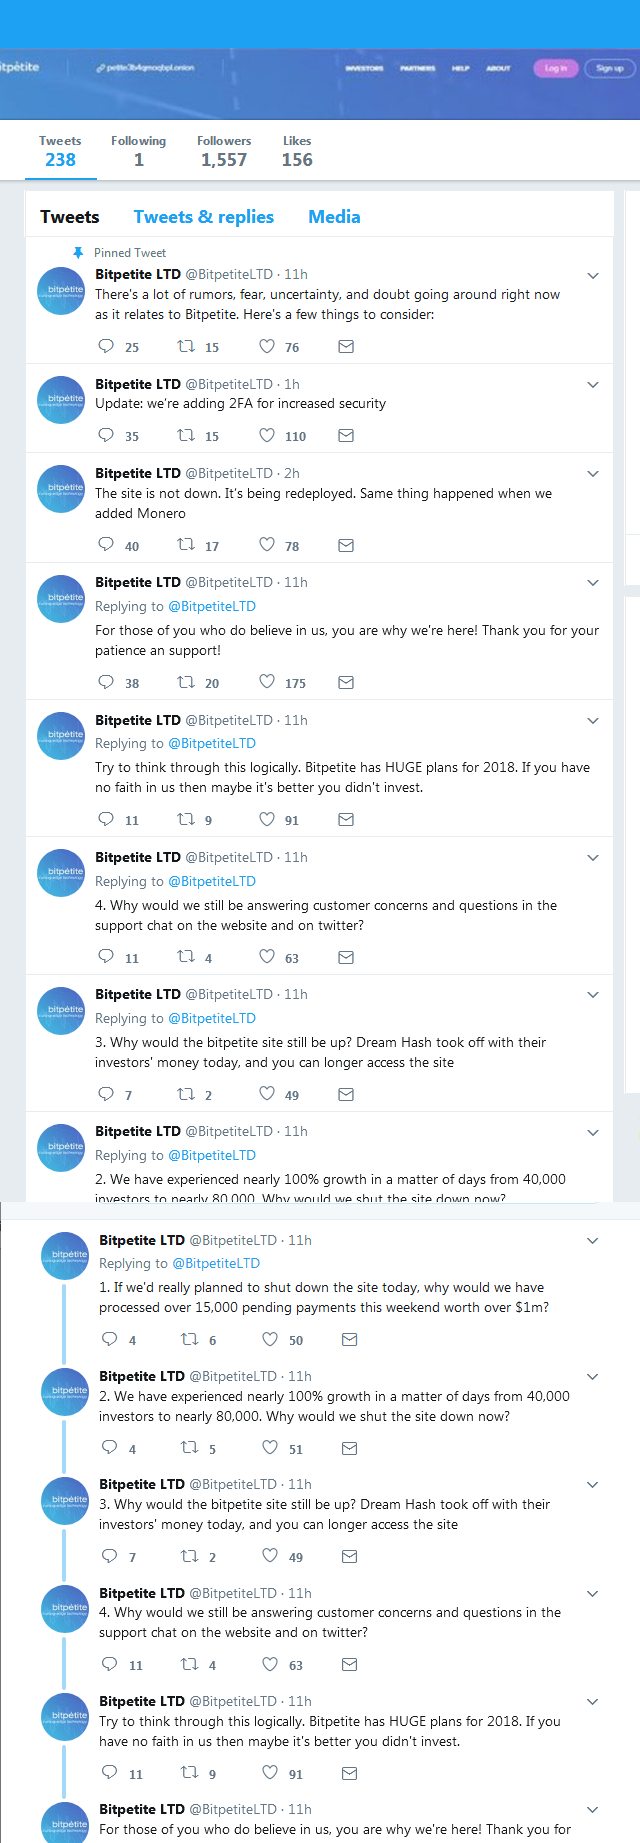 Screenshot-2017-10-31 Bitpetite LTD on Twitter There's a lot of rumors, fear, uncertainty, and doubt going around right now[...].png